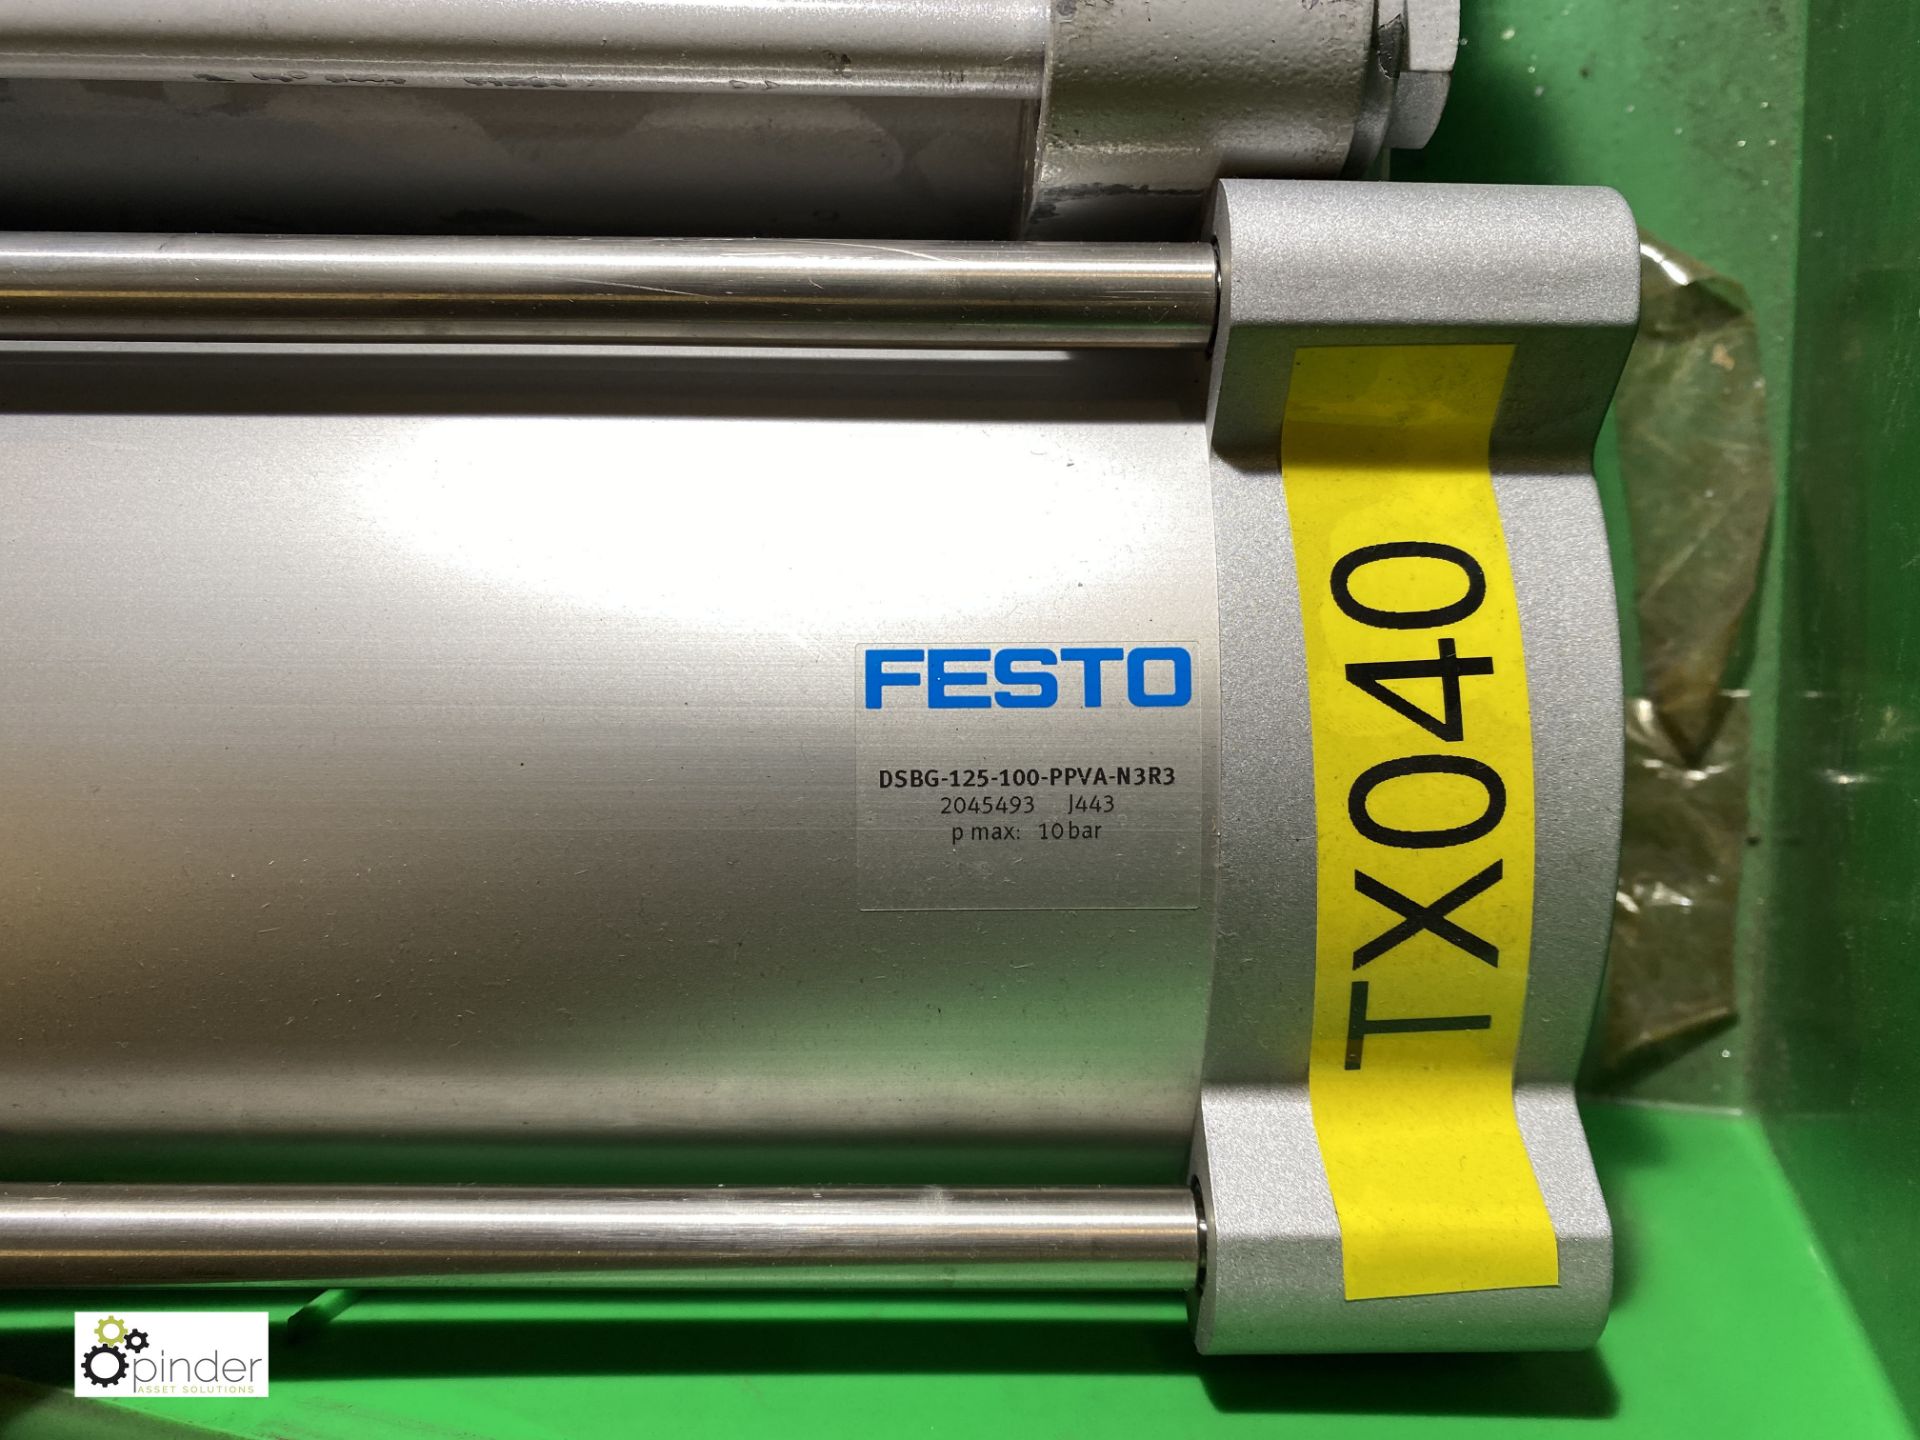 2 Festo DNG-125-100-PPV-A pneumatic Cylinders (please note there is a lift out fee of £5 plus VAT on - Image 3 of 4